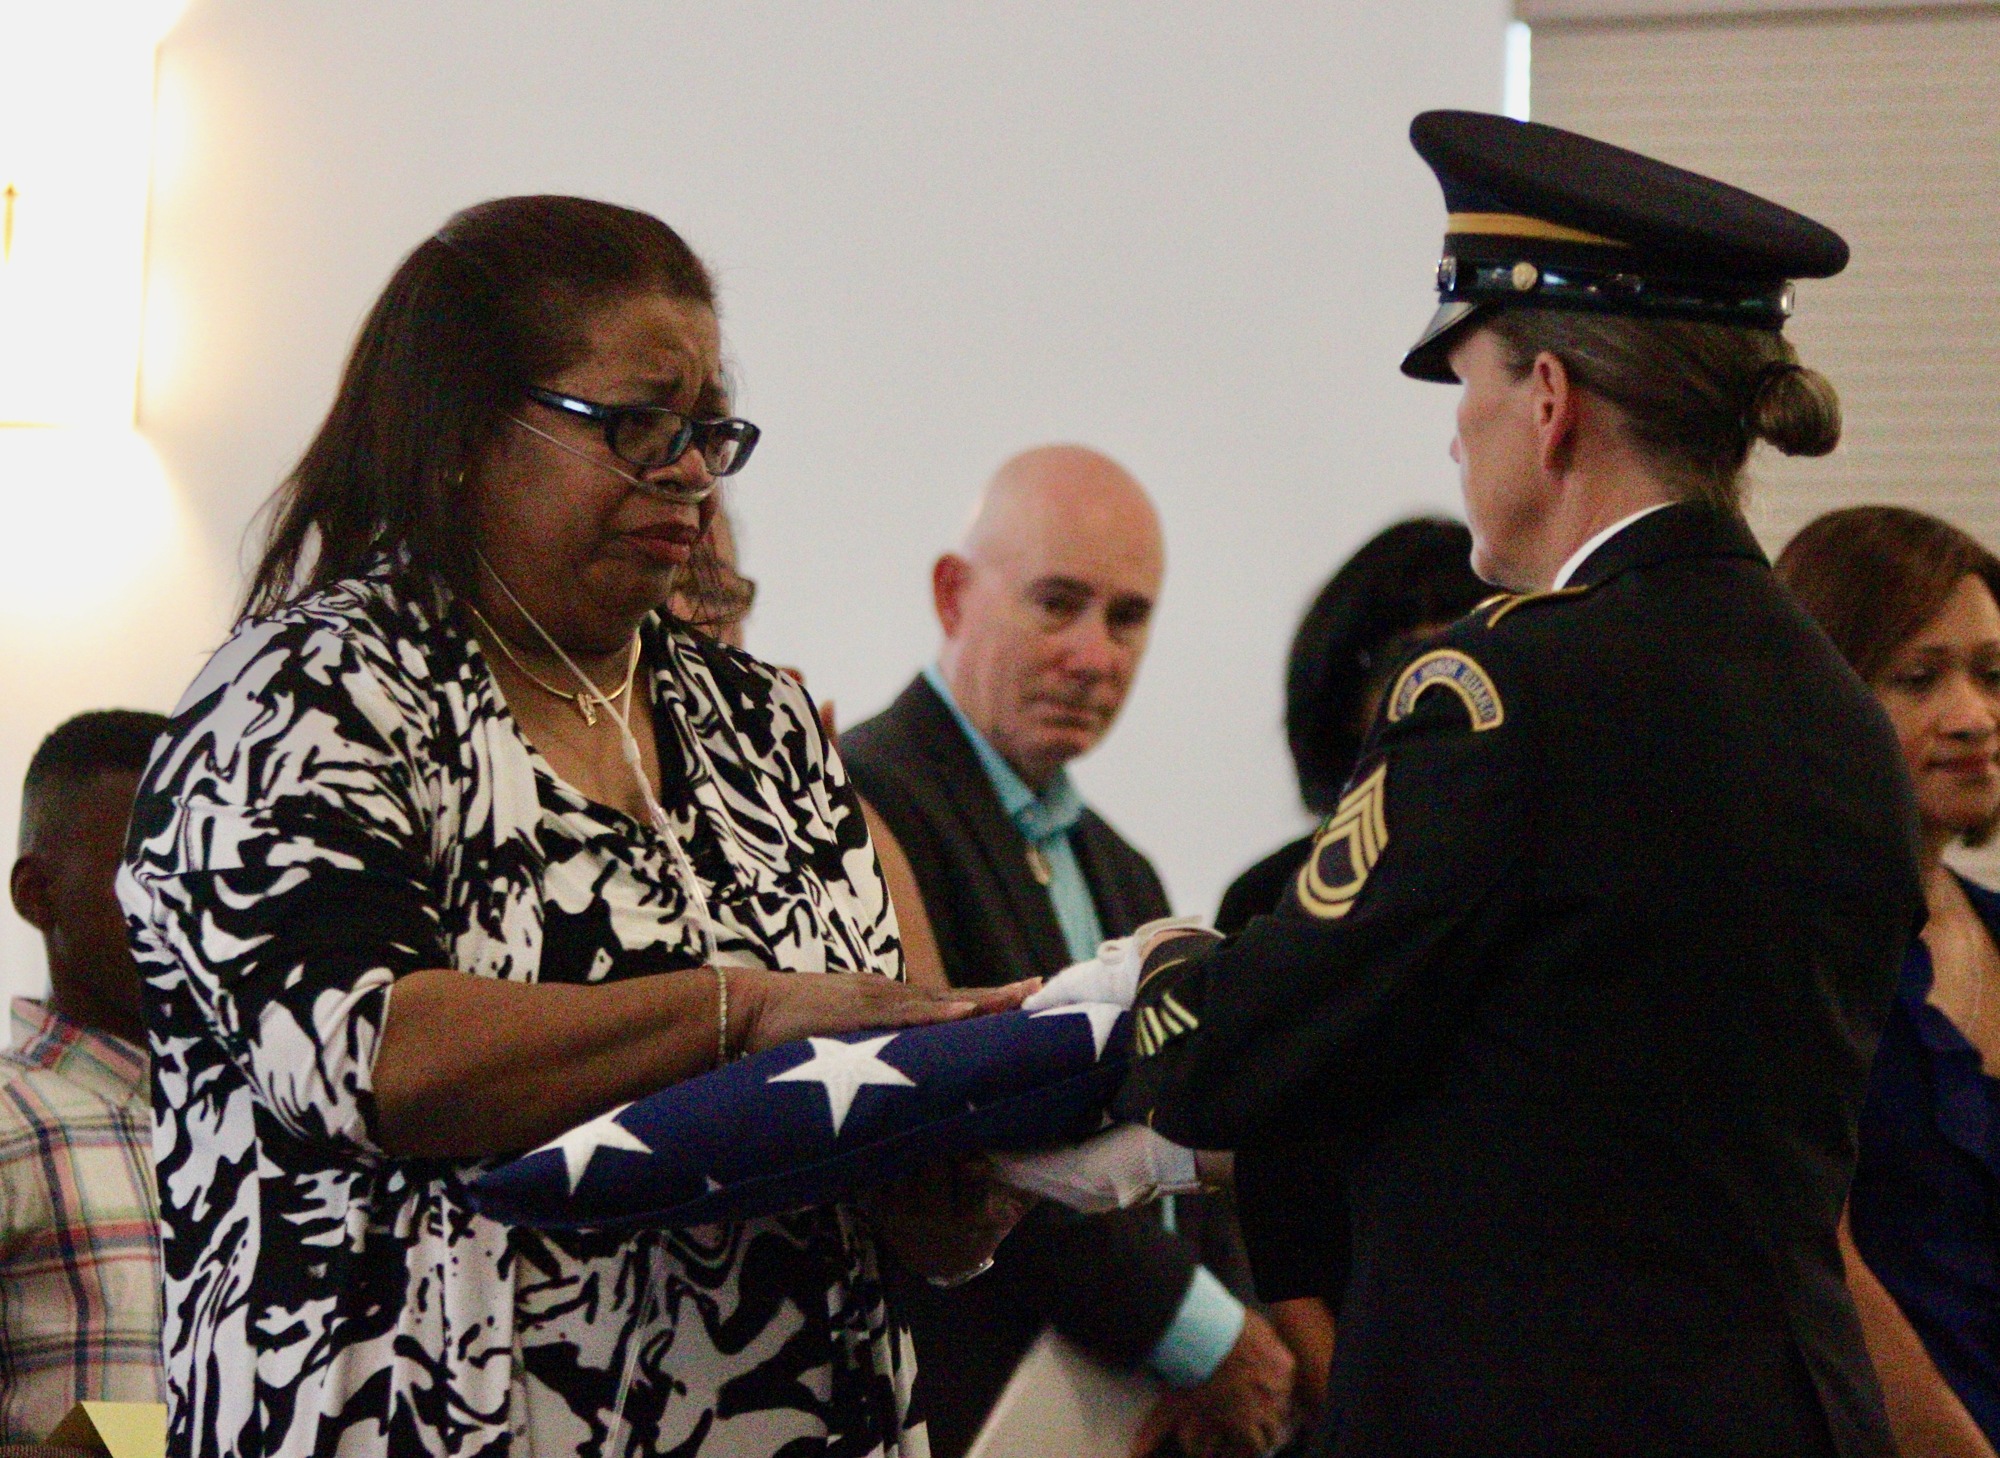 Wendy Gordon receives an American flag honoring her aunt Violet Gordon, who was  one of the first black Women’s Auxiliary Army Corps in World War II. Photo by Ray Boone